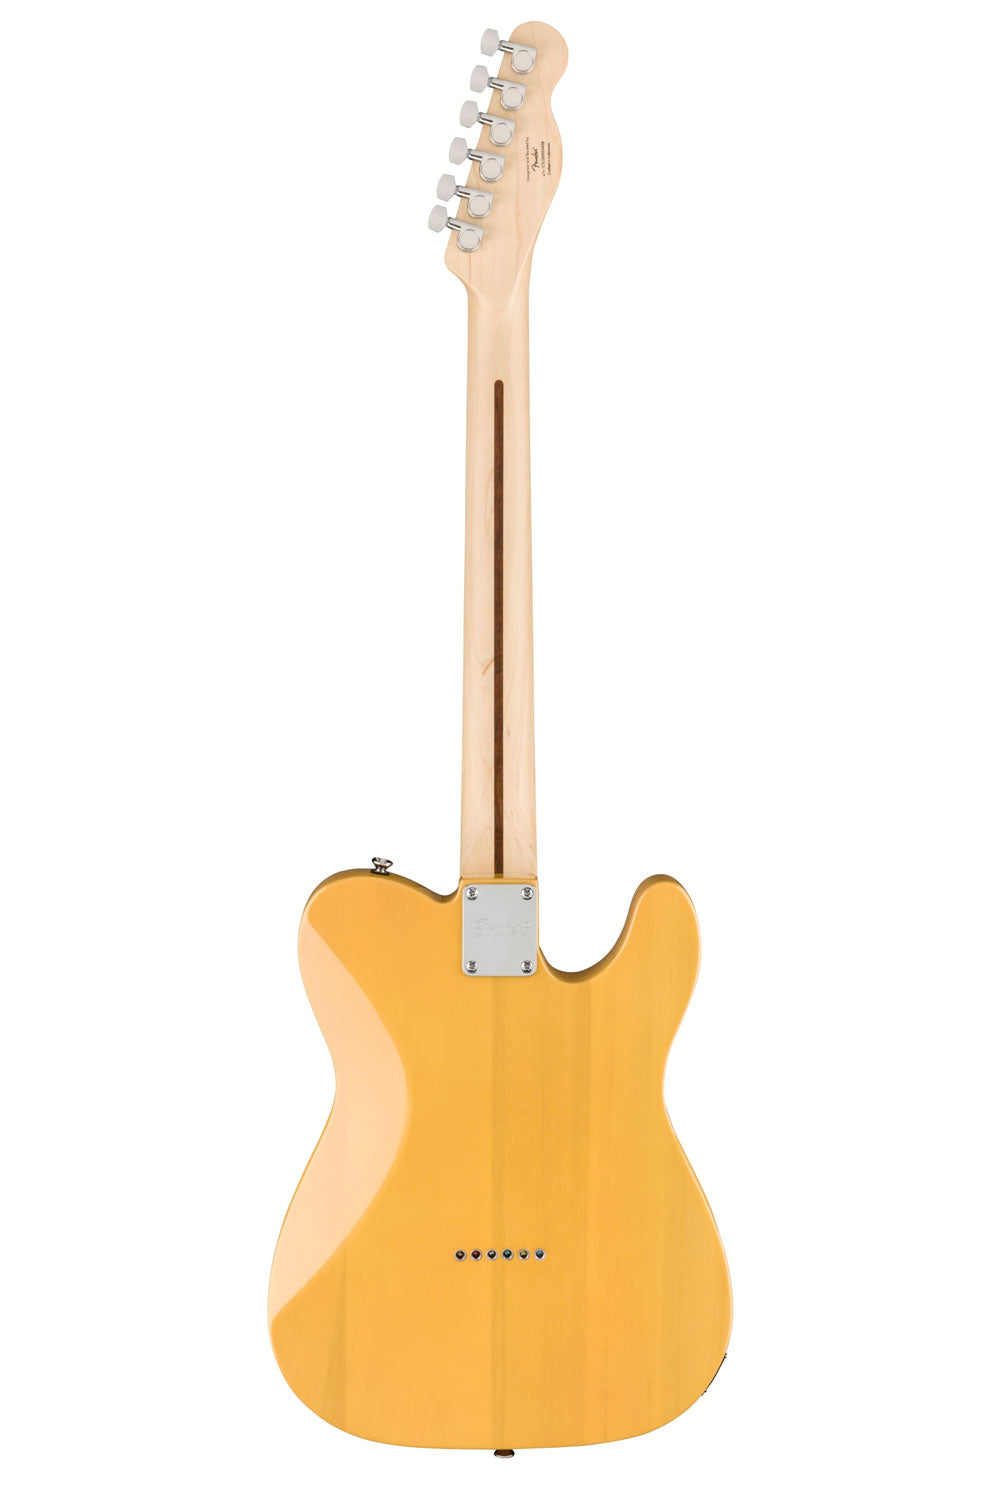 Squier Affinity Series Telecaster Left Handed with Maple Fingerboard - Butterscotch Blonde